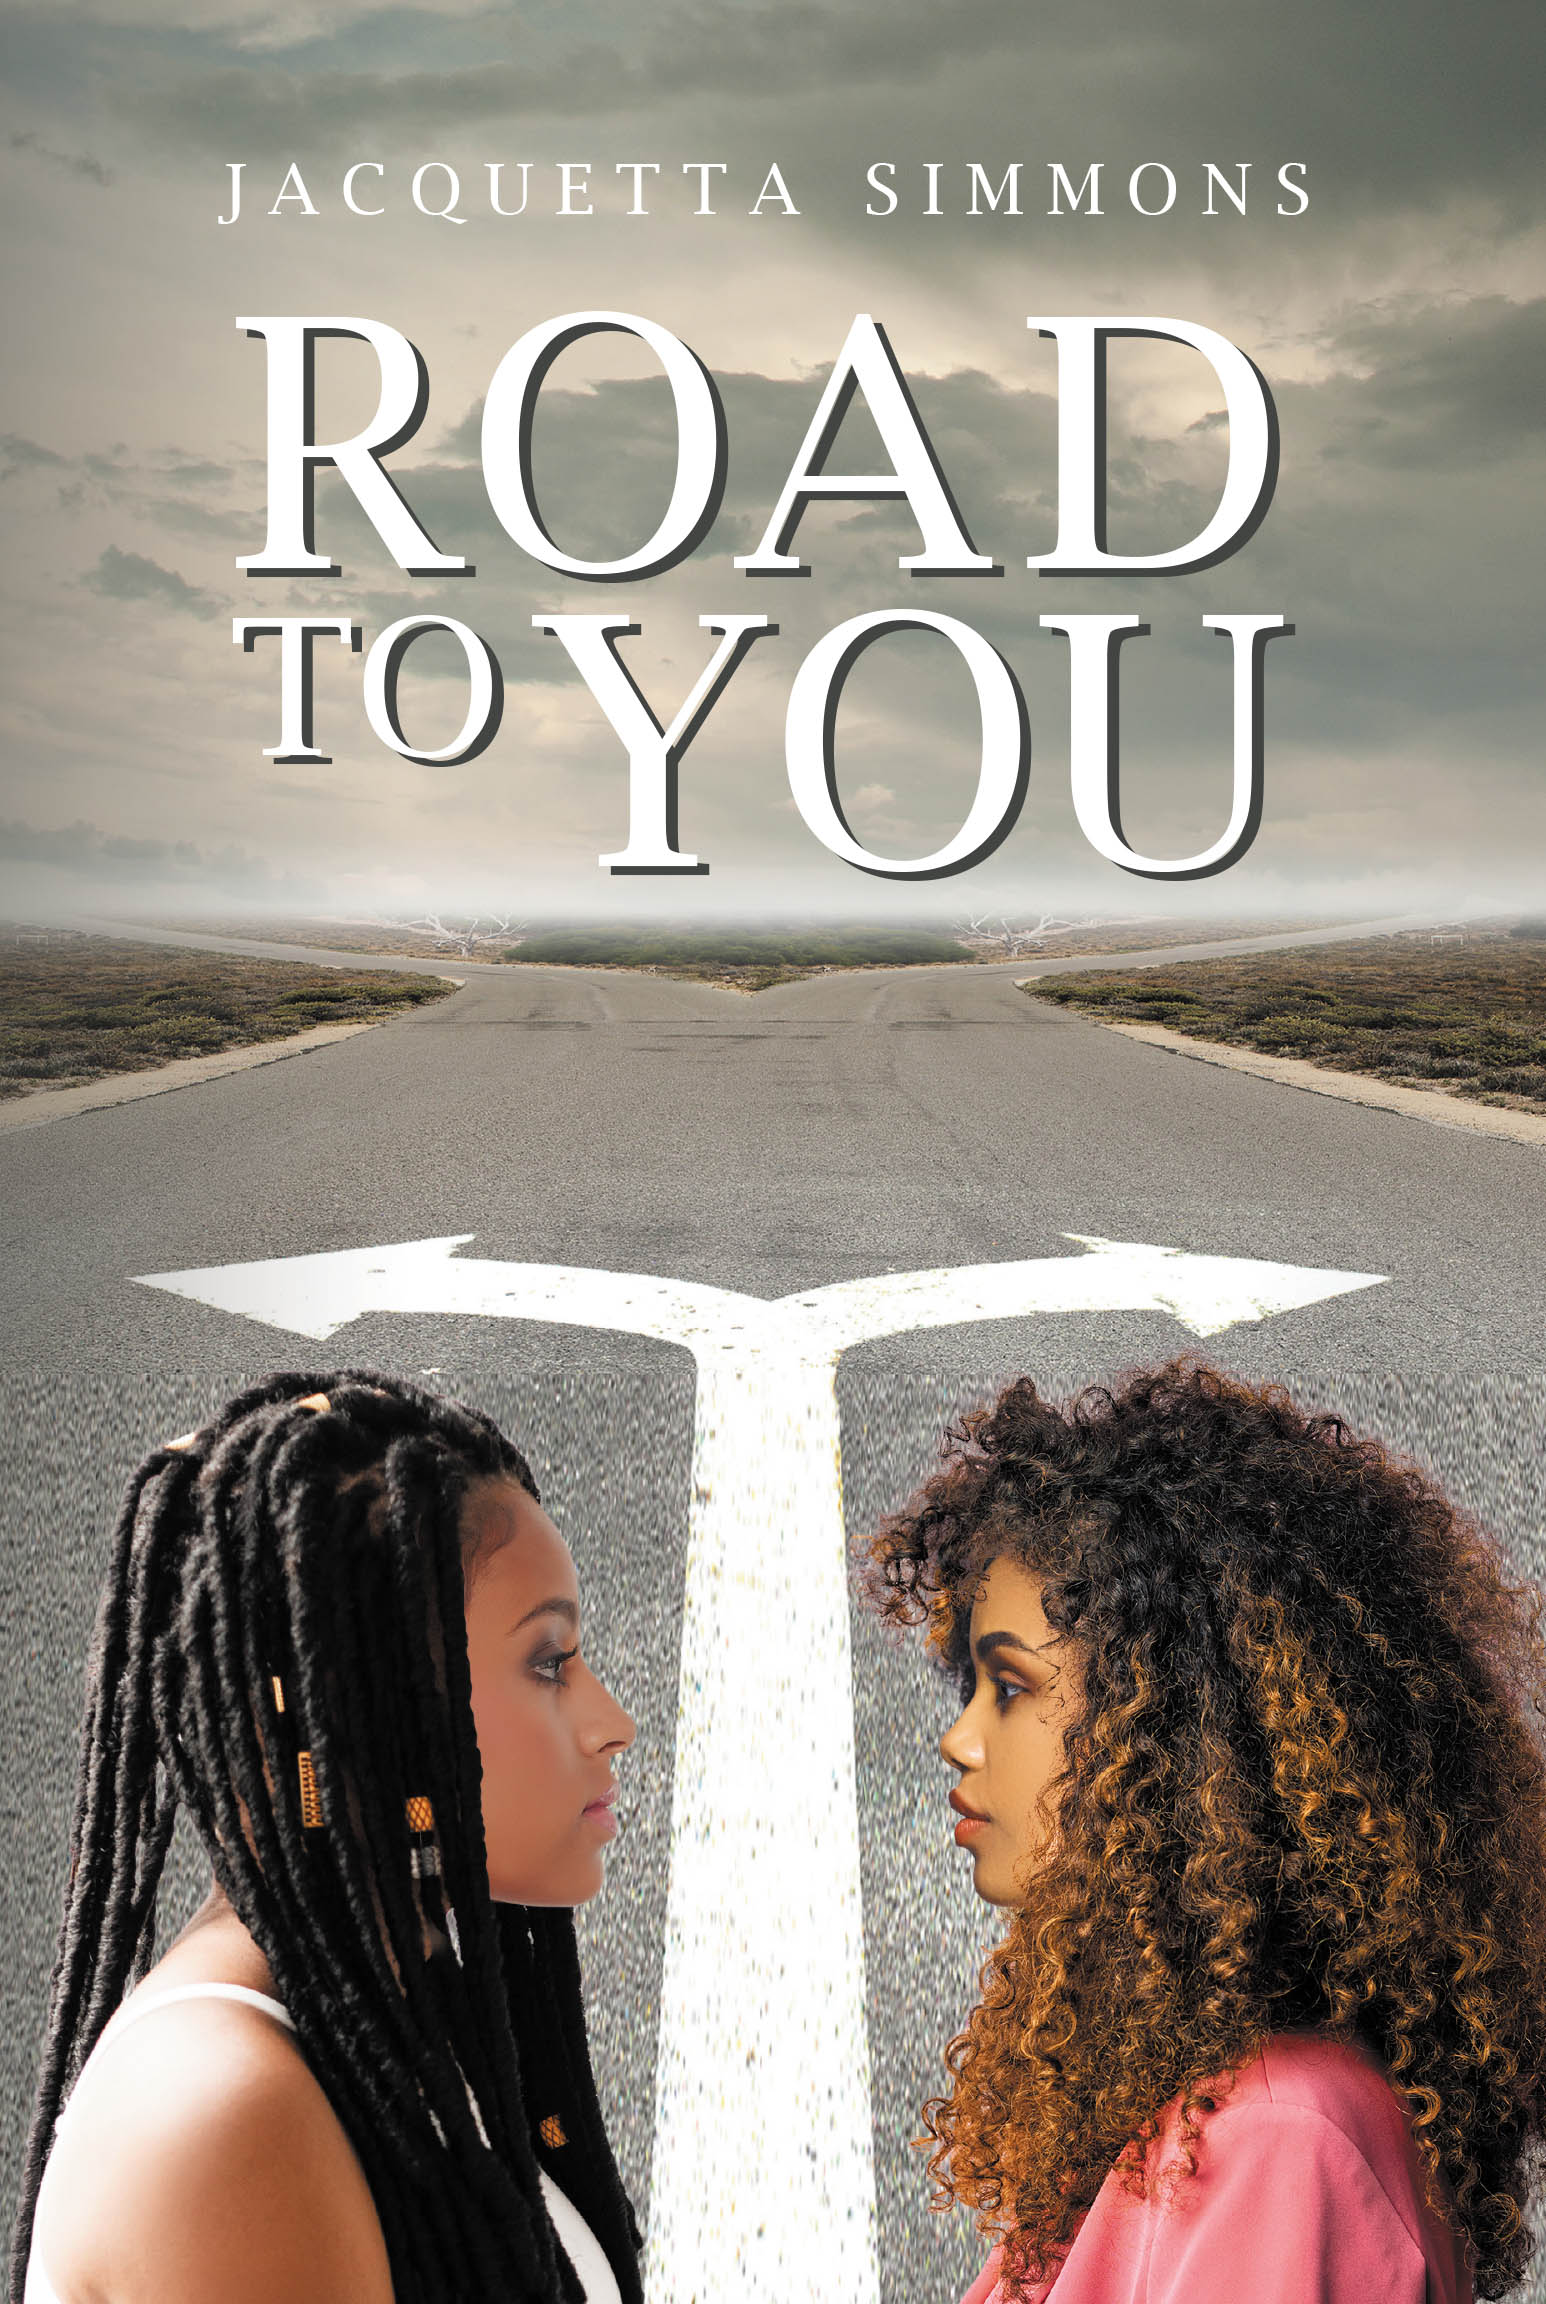 Author Jacquetta Simmons’s New Book, "Road to You," is a Compelling Narrative That Delves Deep Into the Complexities of Love, Friendship, and Self-Discovery